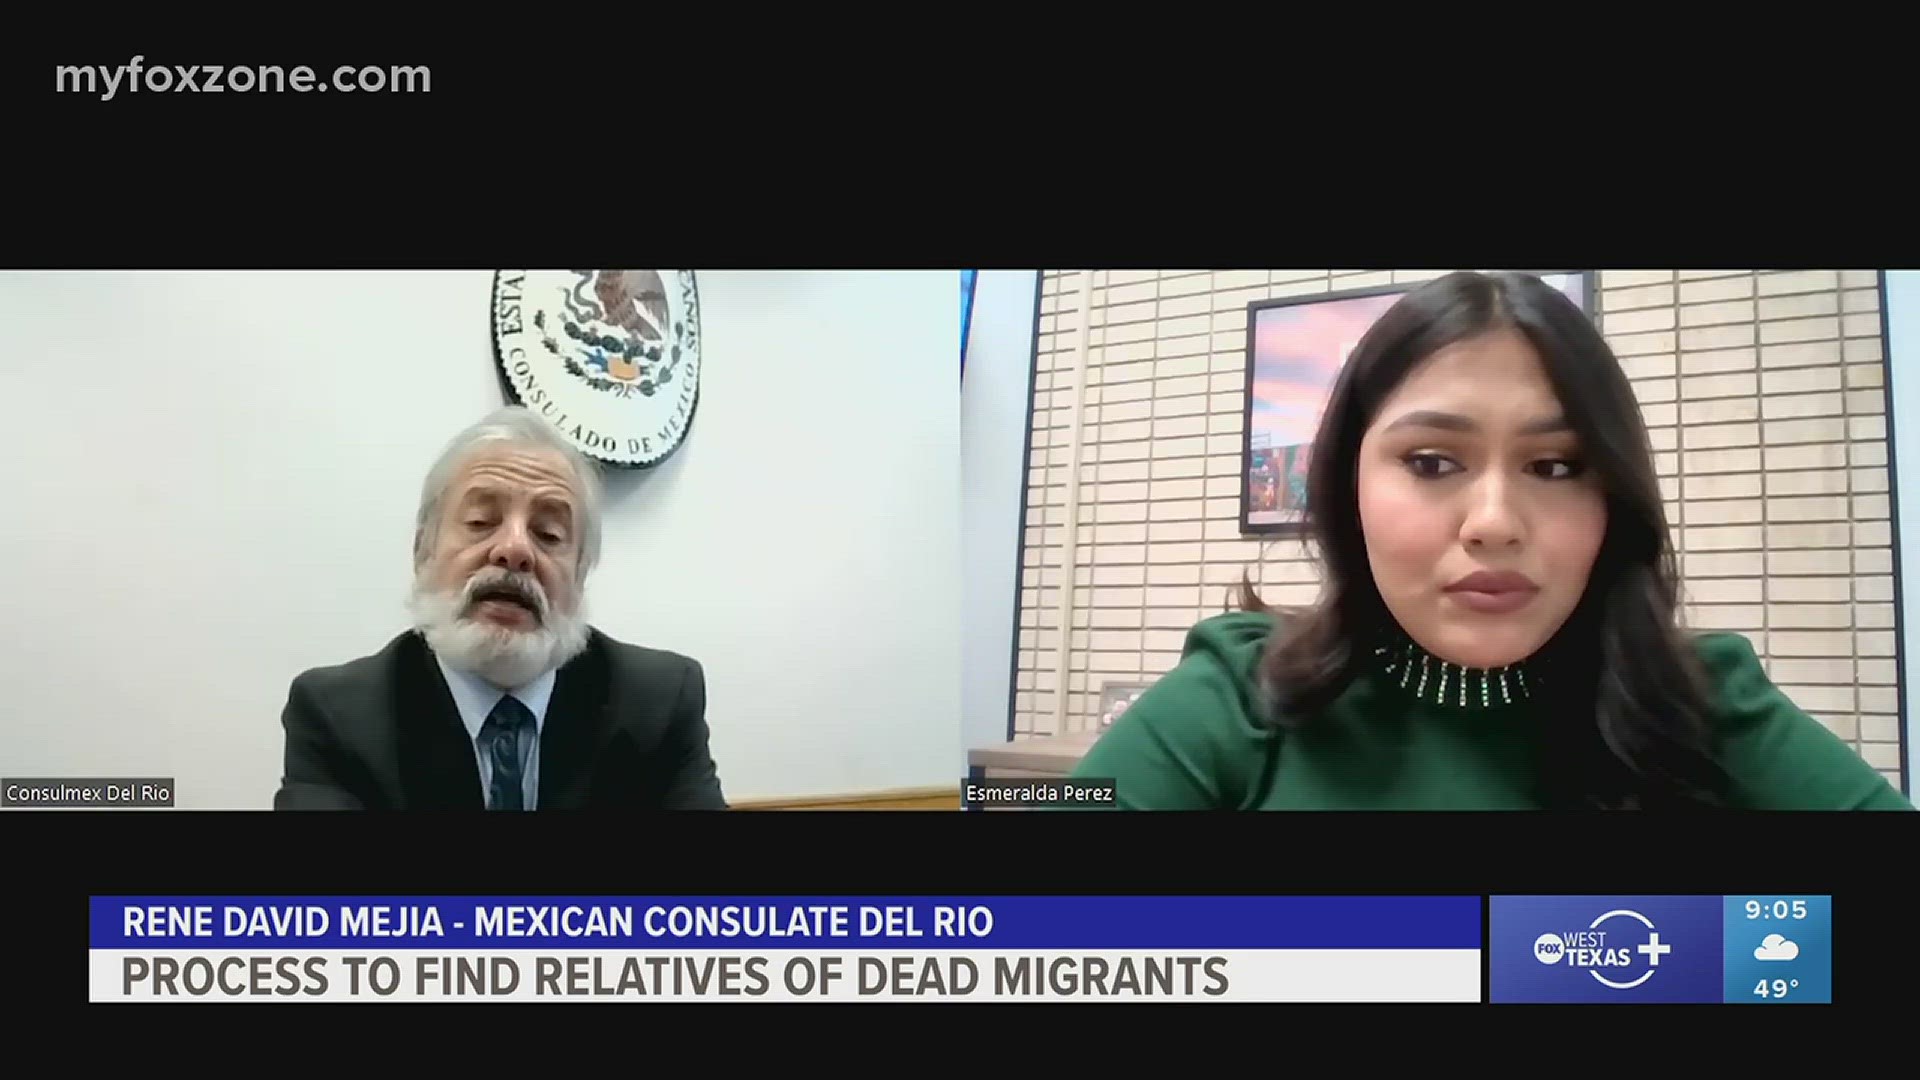 Mexican Consulate in Del Rio shares how they help find relatives of dead migrants in the United States.